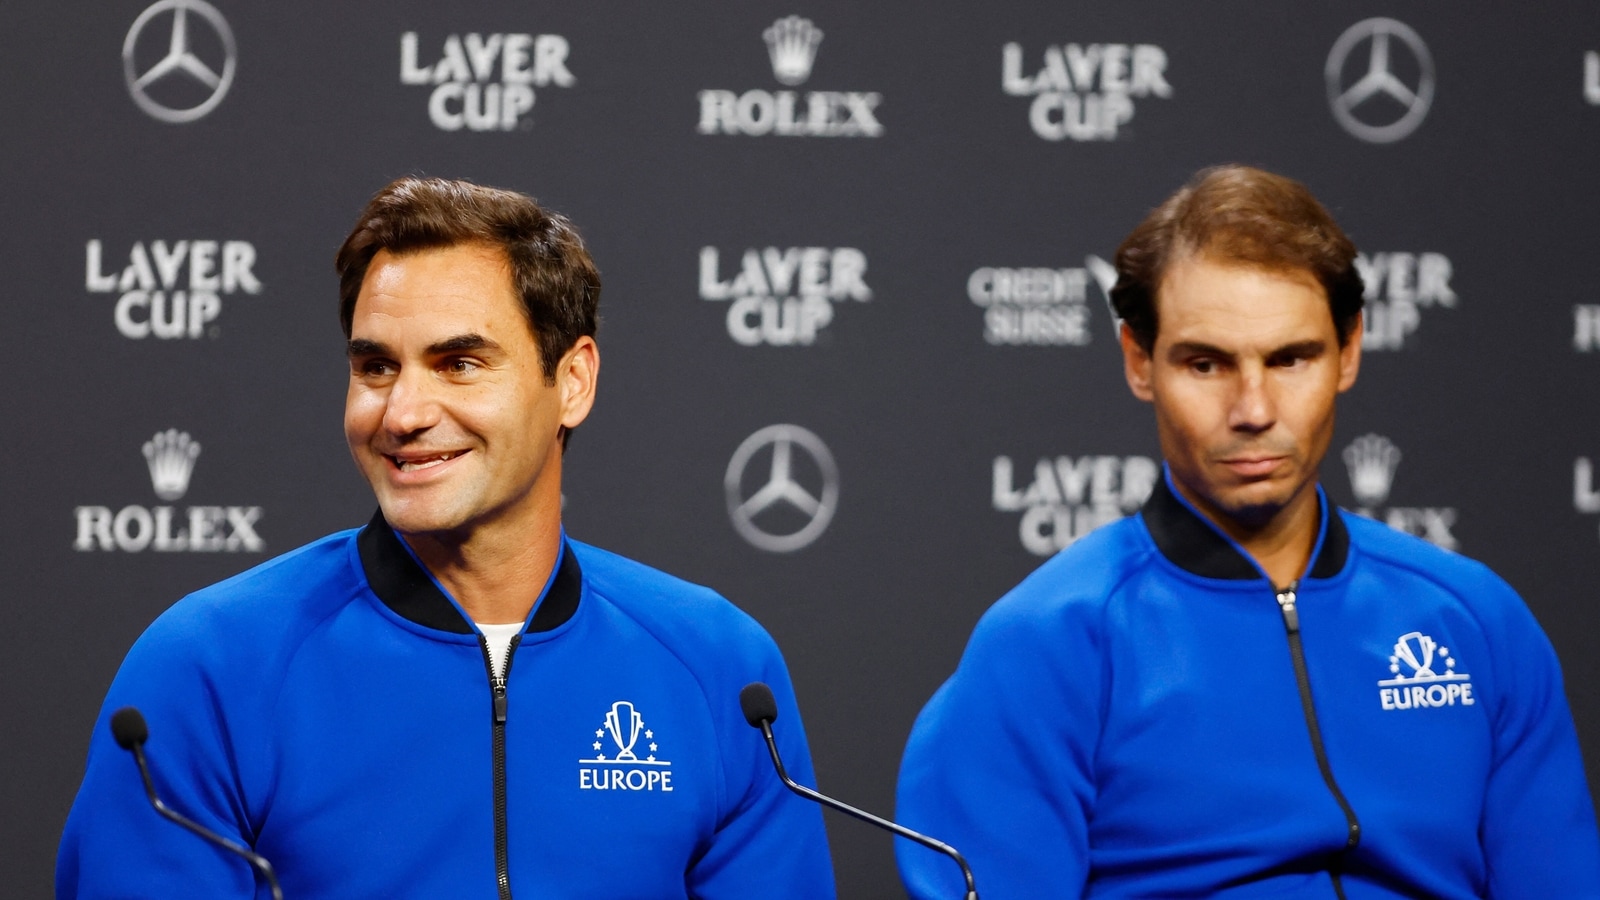 Laver Cup Federer confirmed to team up with Nadal in his final match Tennis News